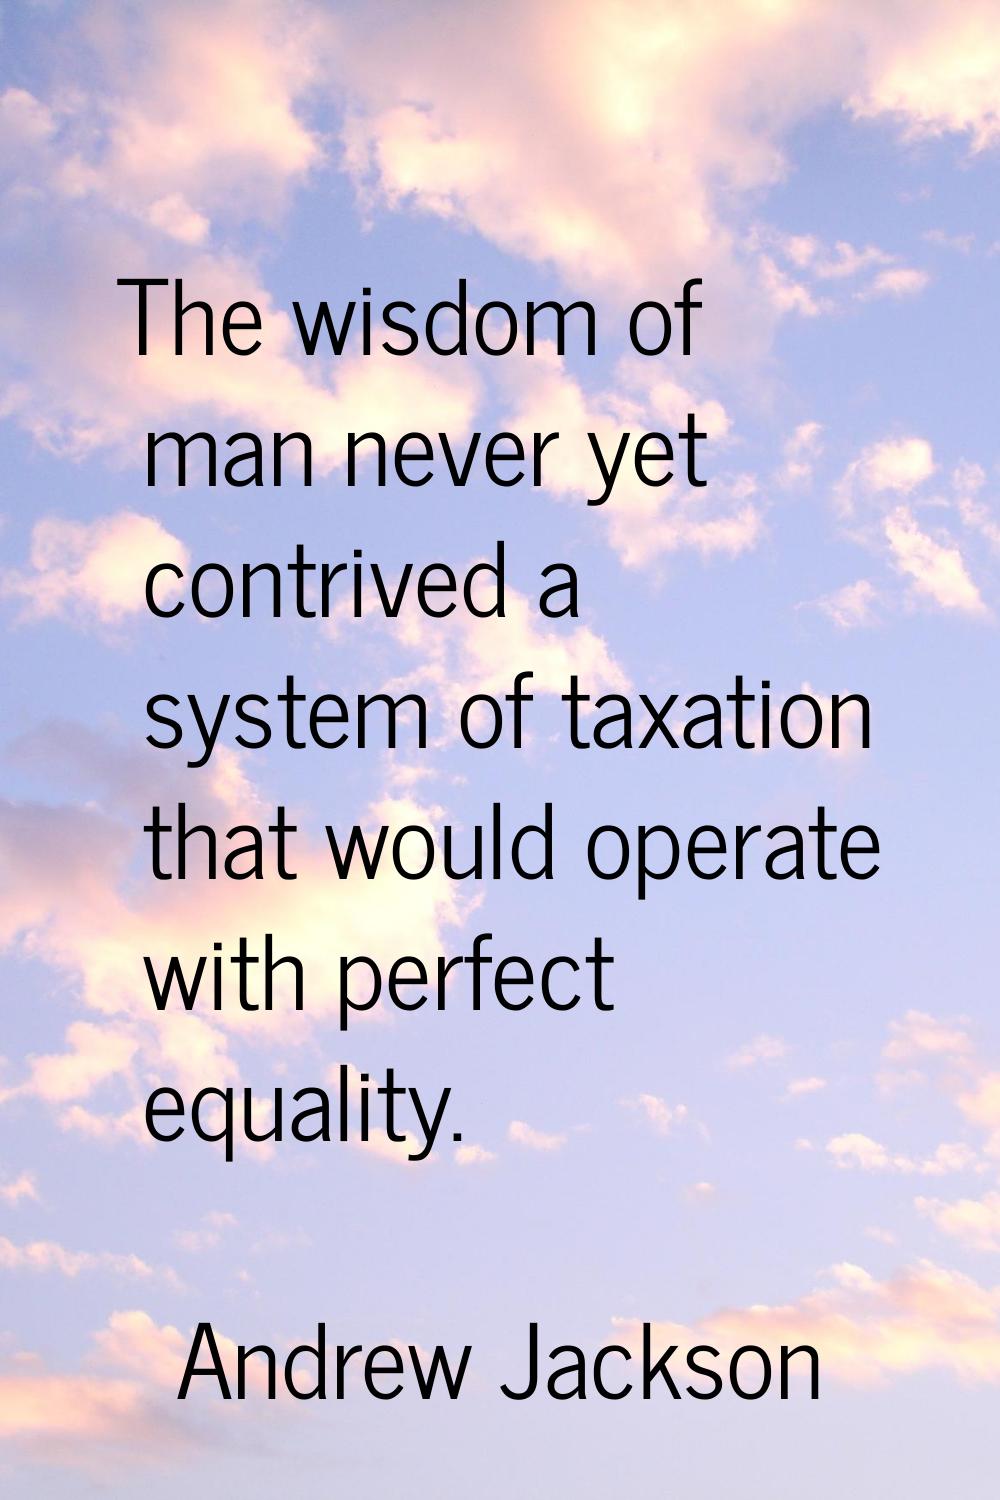 The wisdom of man never yet contrived a system of taxation that would operate with perfect equality